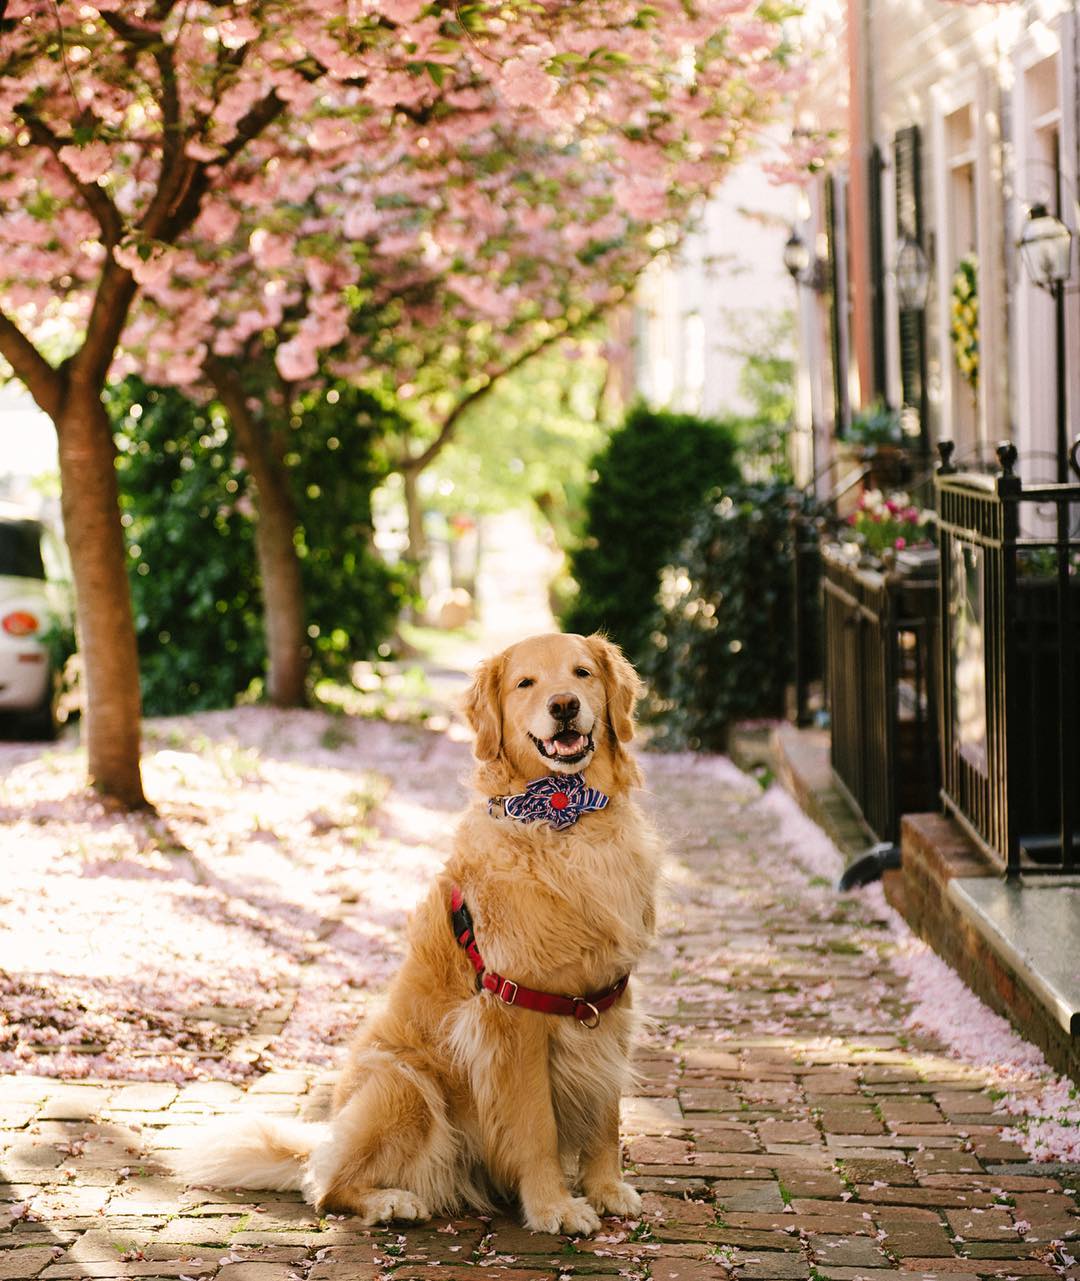 Gold retriever dog wearing a bow tie on the sidewalk. Photo by Instagram user @samanthabrookephoto